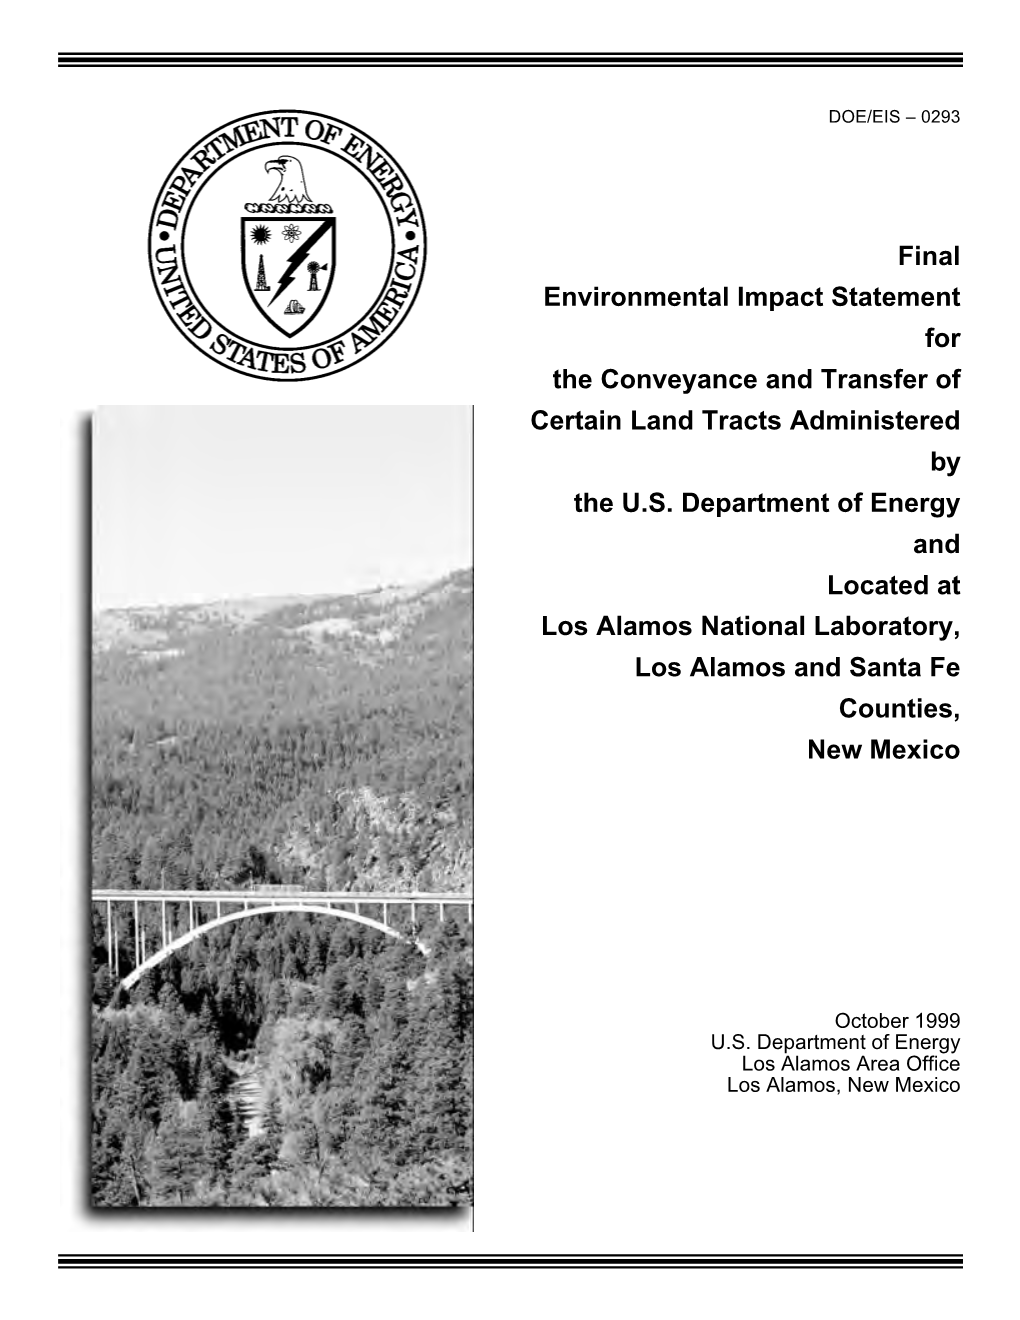 DOE/EIS-0293 Final Environmental Impact Statement for The